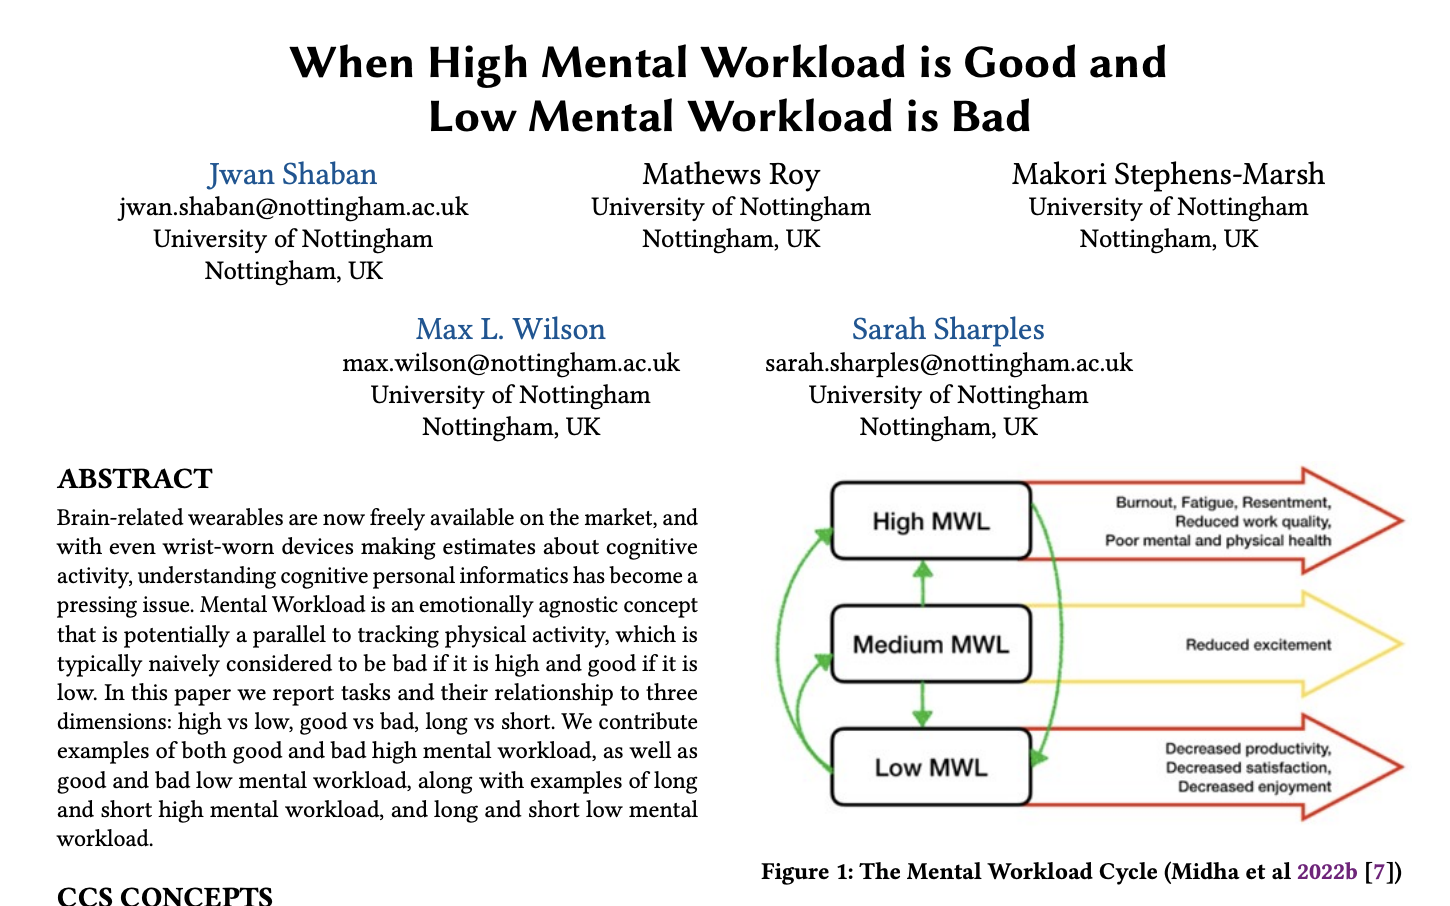 image of research paper entitled When High Mental Workload is Good and Low Mental Workload is Bad.